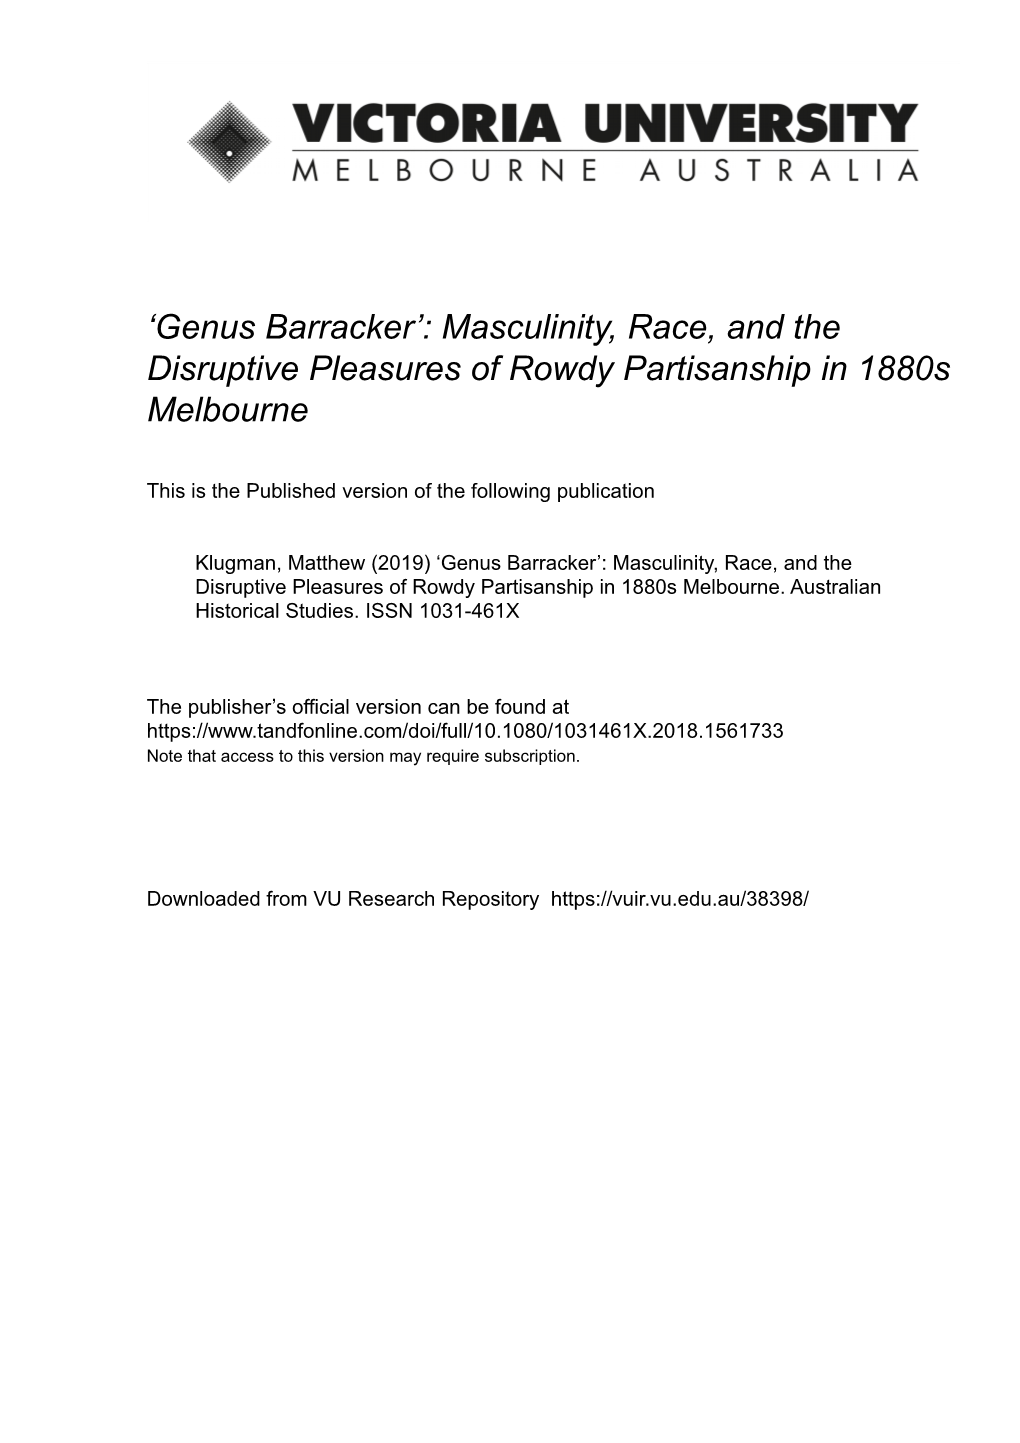 'Genus Barracker': Masculinity, Race, and the Disruptive Pleasures Of